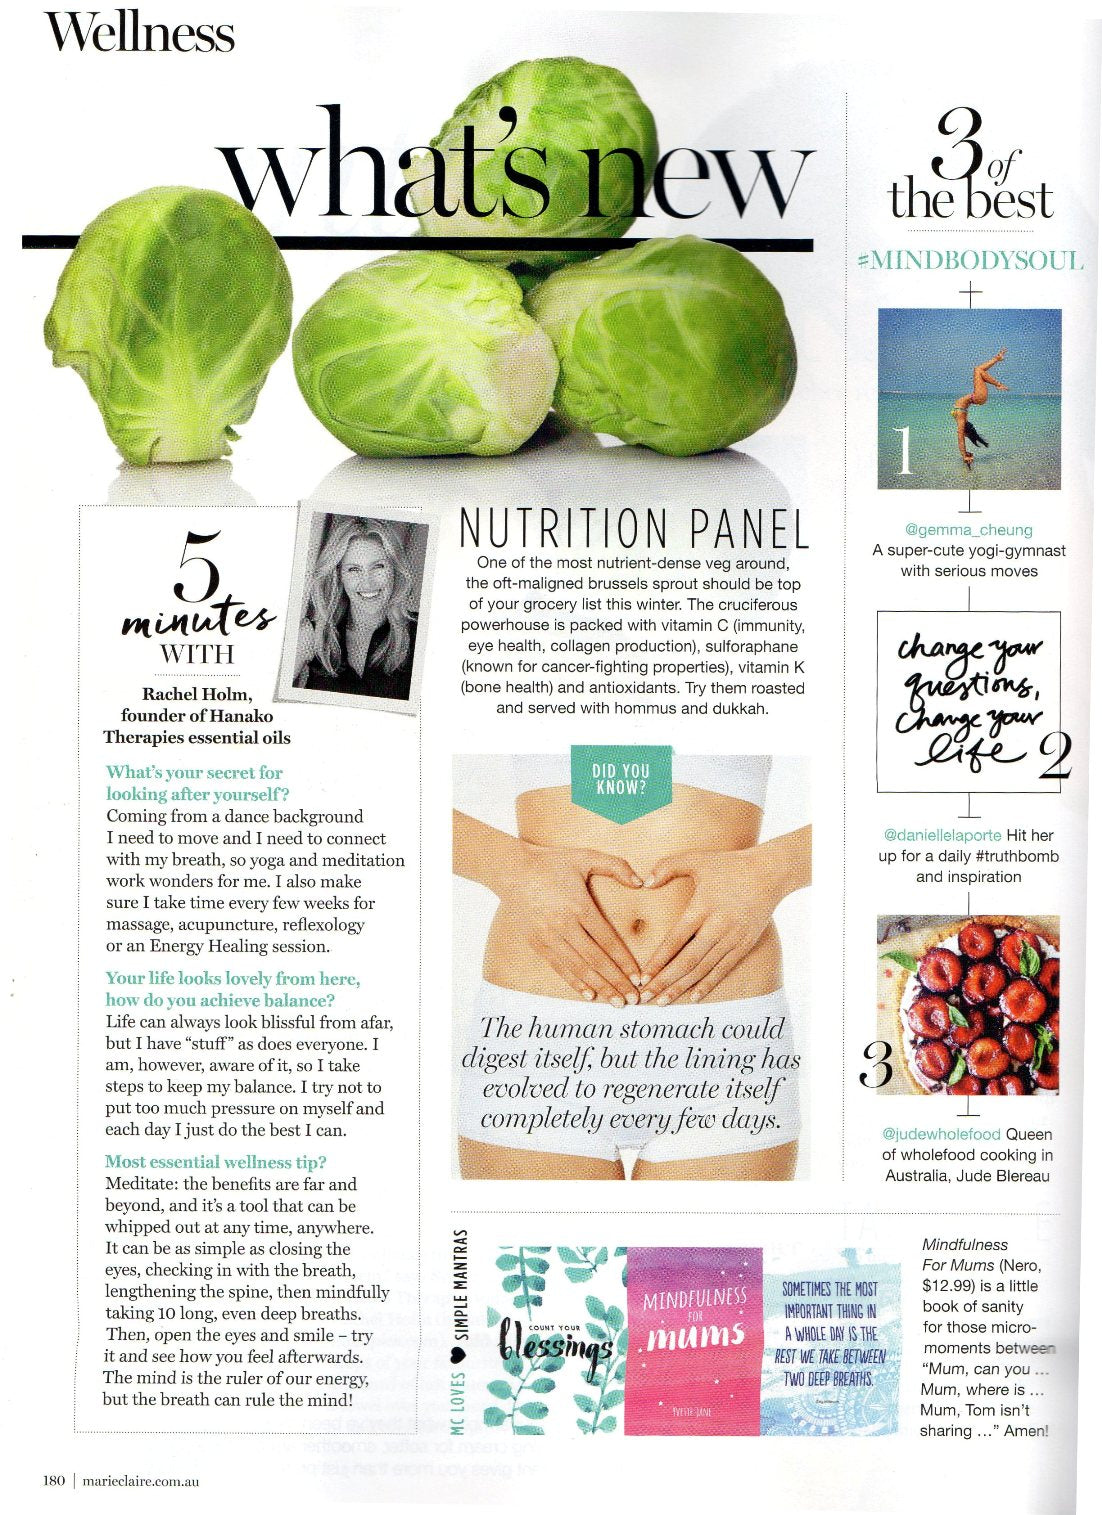 Marie Claire featuring Hanako Therapies